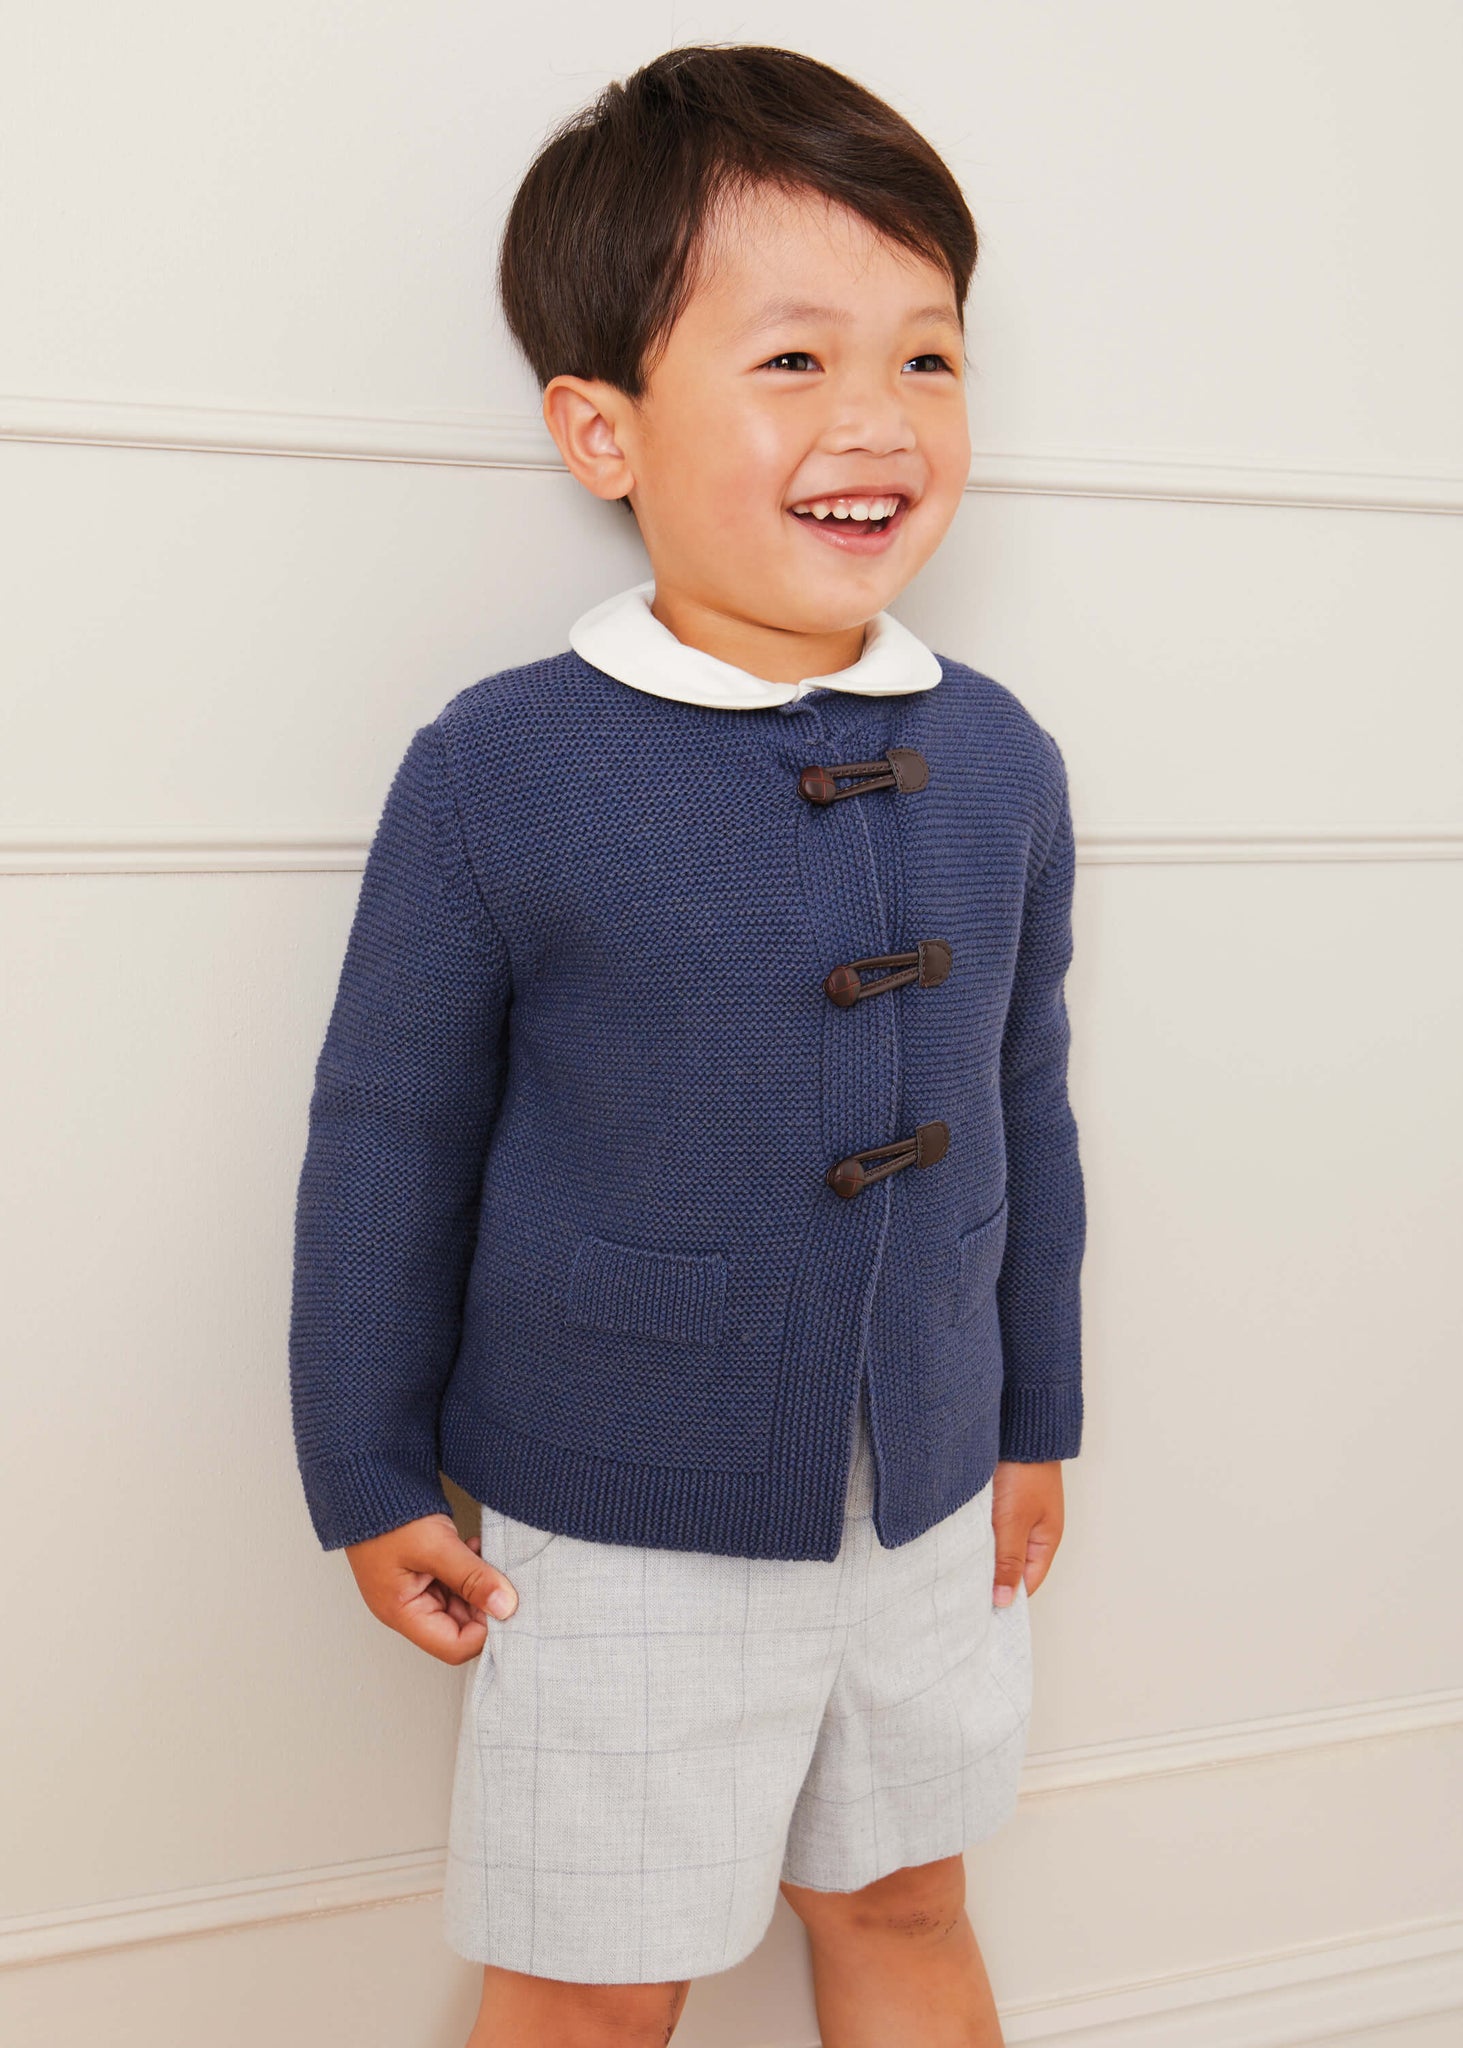 Toggle Fastening Knitted Cardigan in Blue (12mths-10yrs) Knitwear  from Pepa London